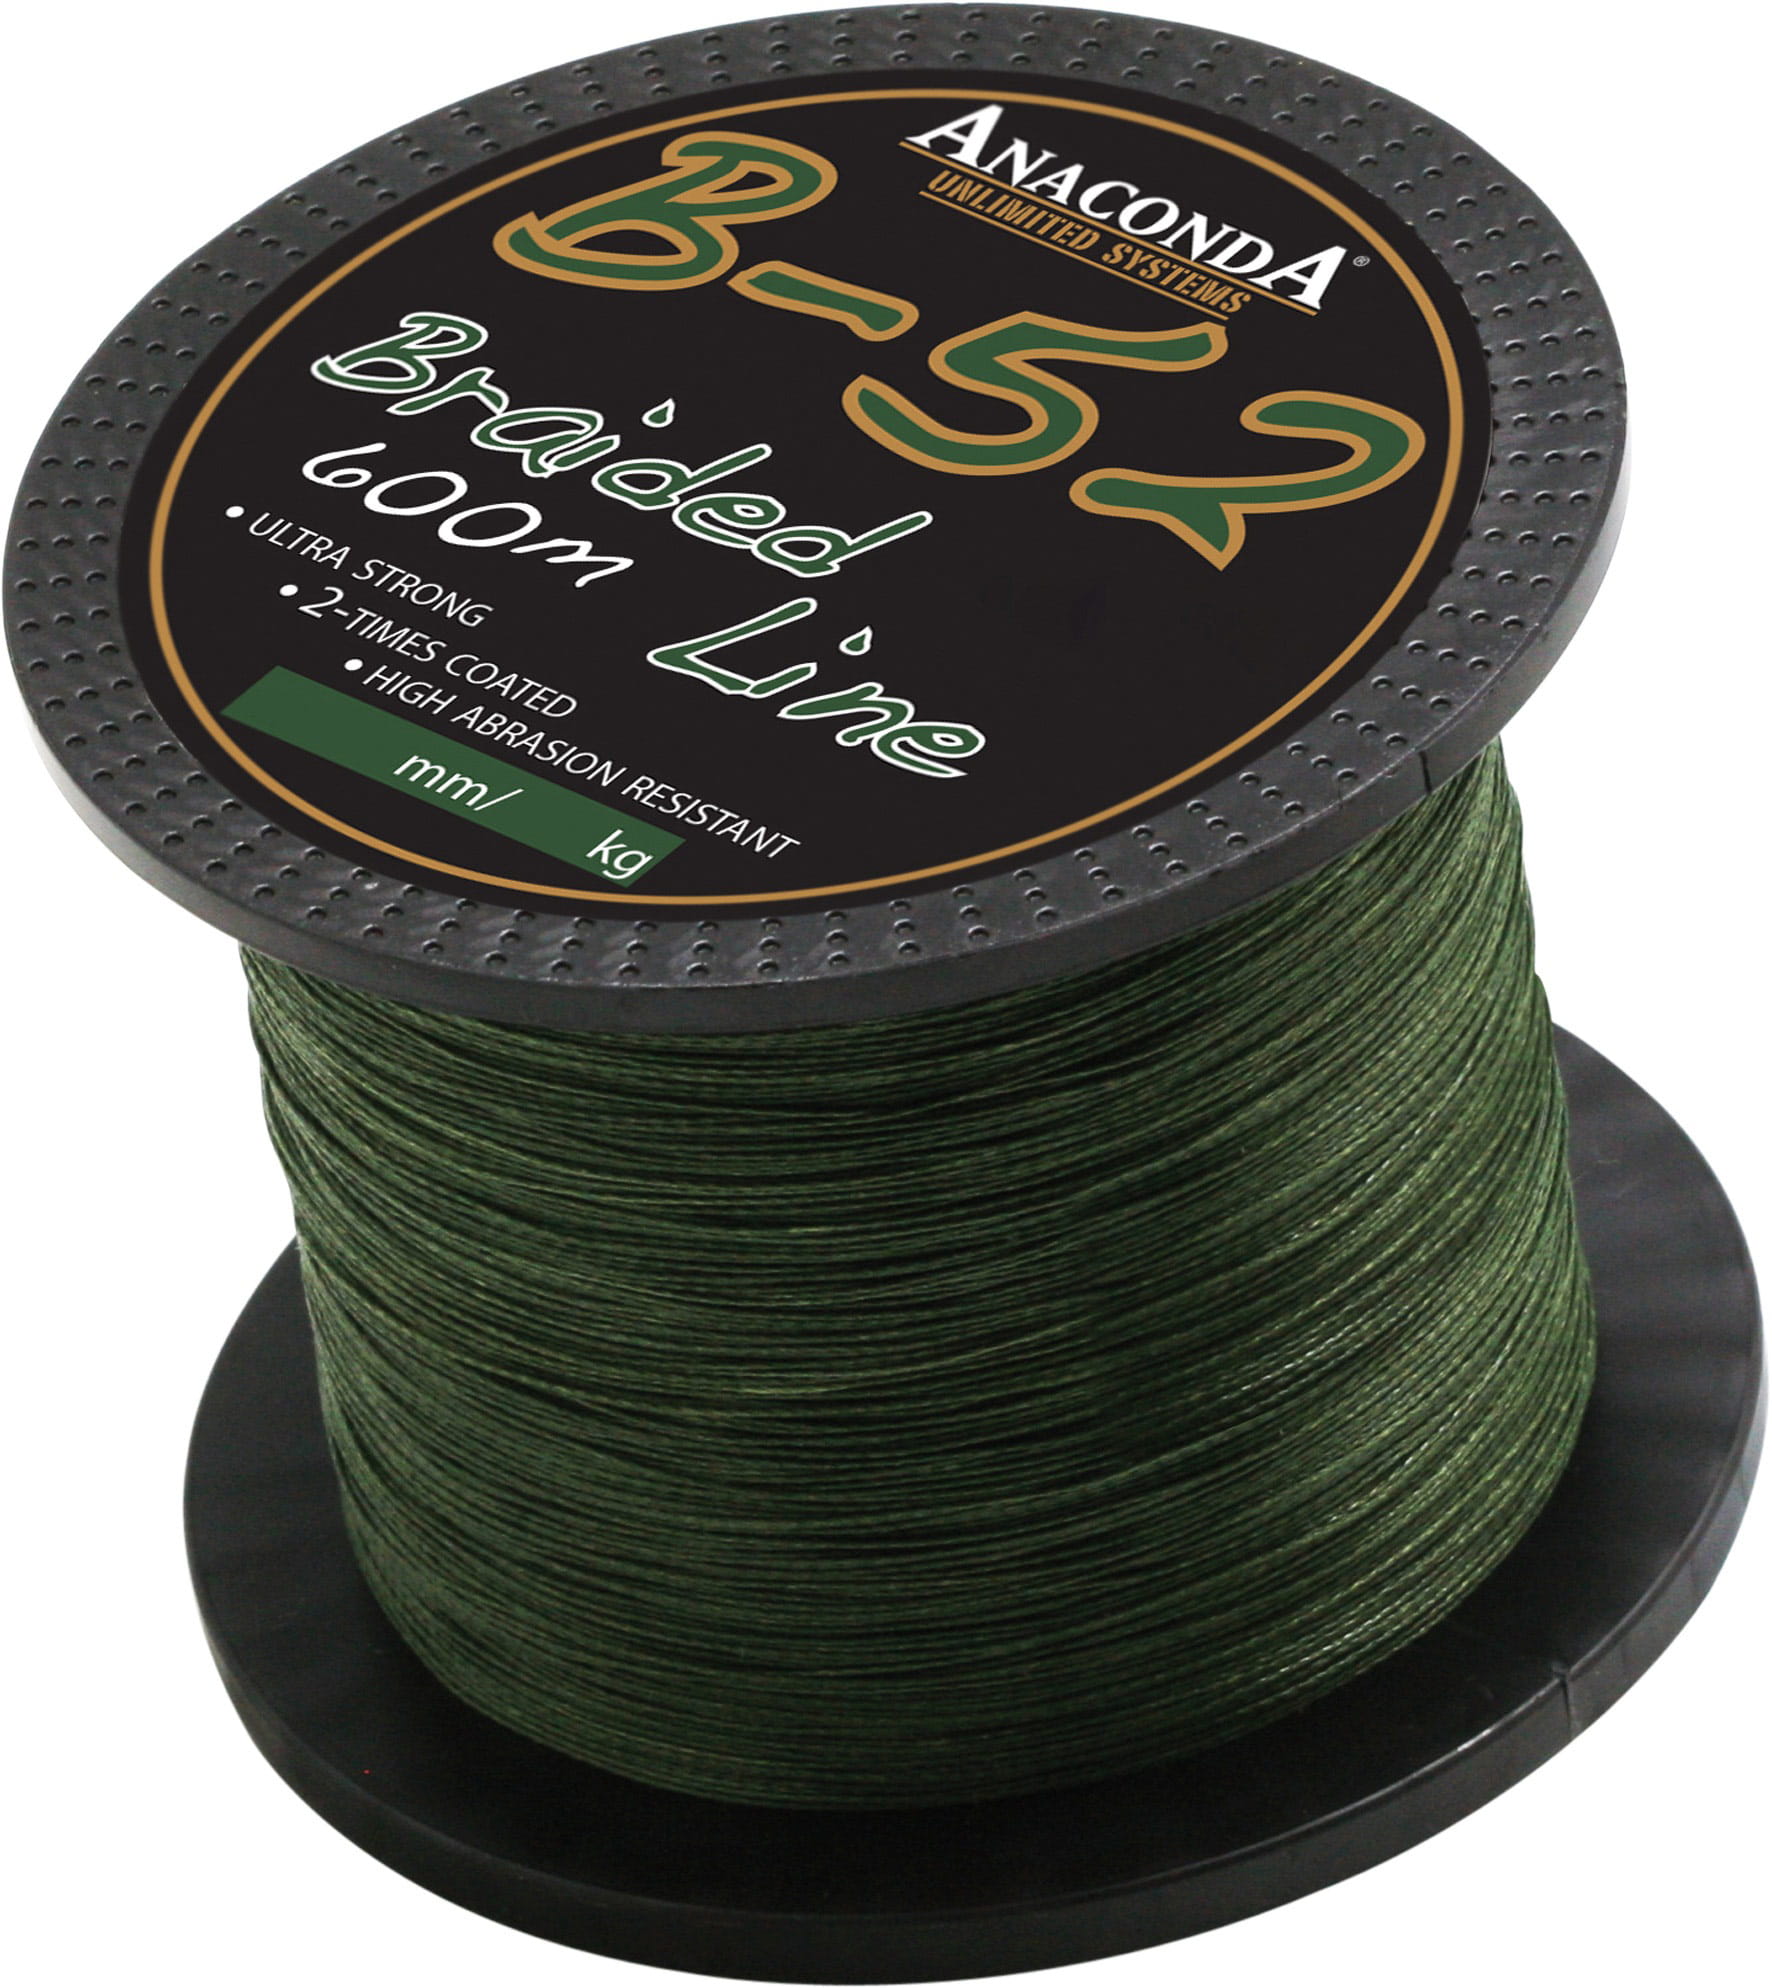 WFT Target fish pike 400 m 0.30 mm 8.1 kg green - fishing line for pike  fishing, pike line, monofilament line for pike, mono line